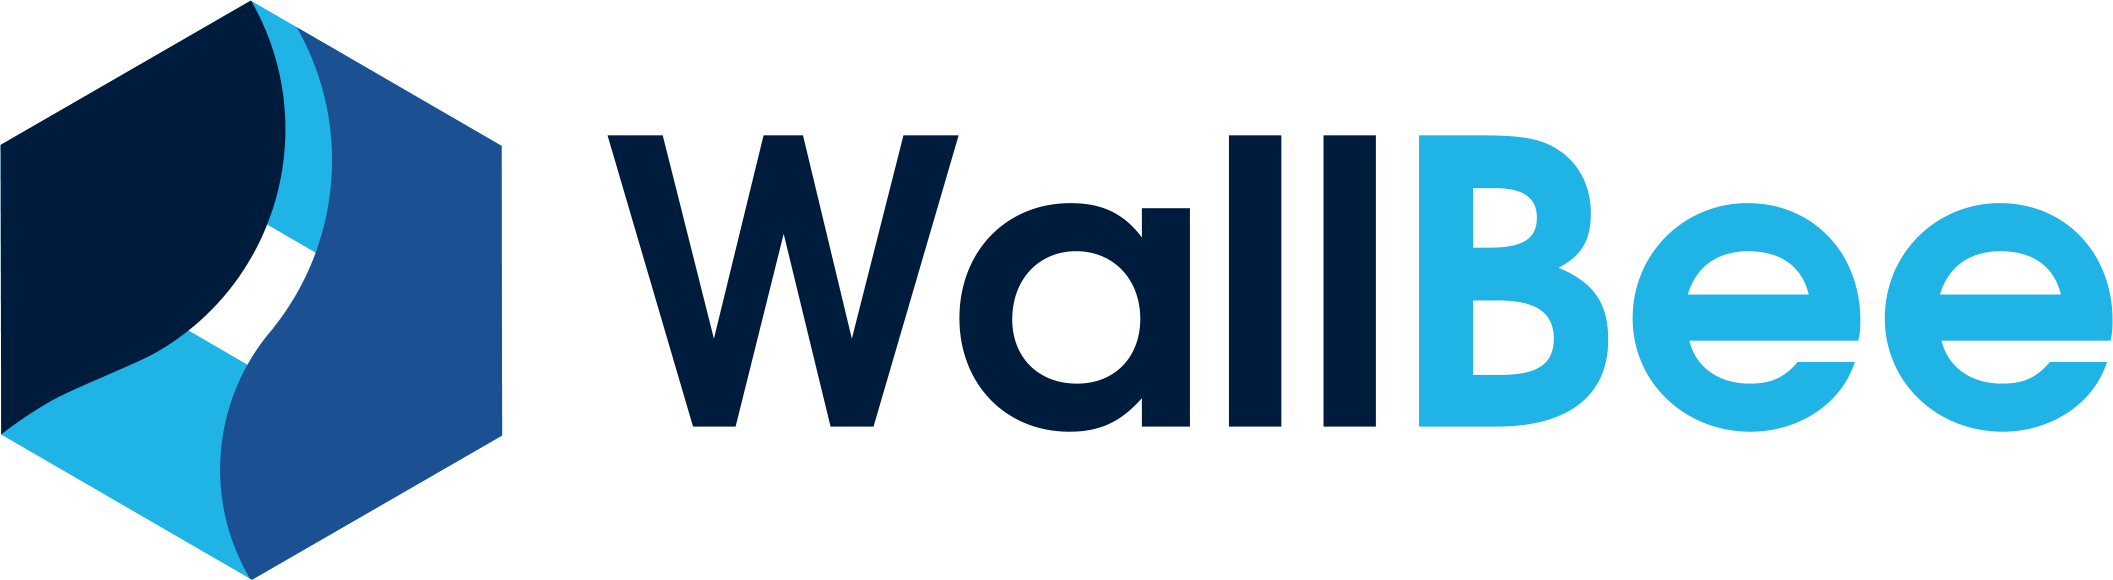 WallBee’s Booking & Delivery Management System.